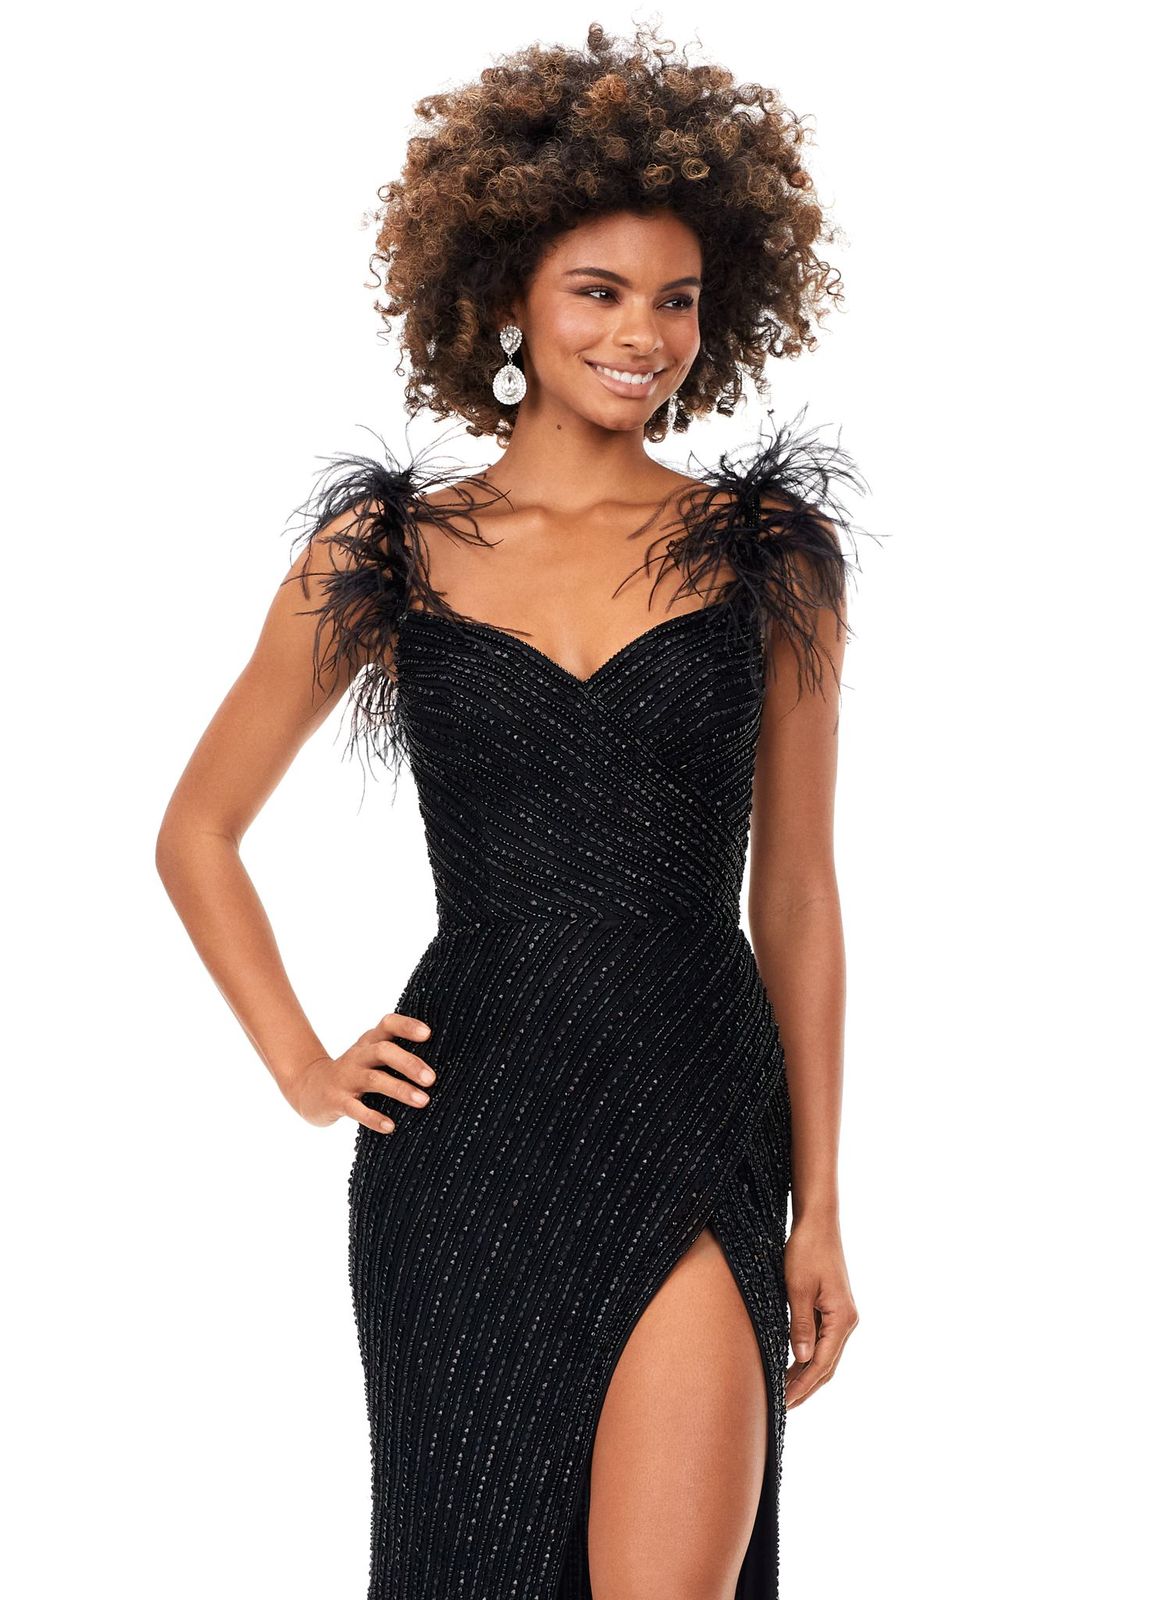 Ashley Lauren 11367 Fully Beaded Gown with Feather Straps